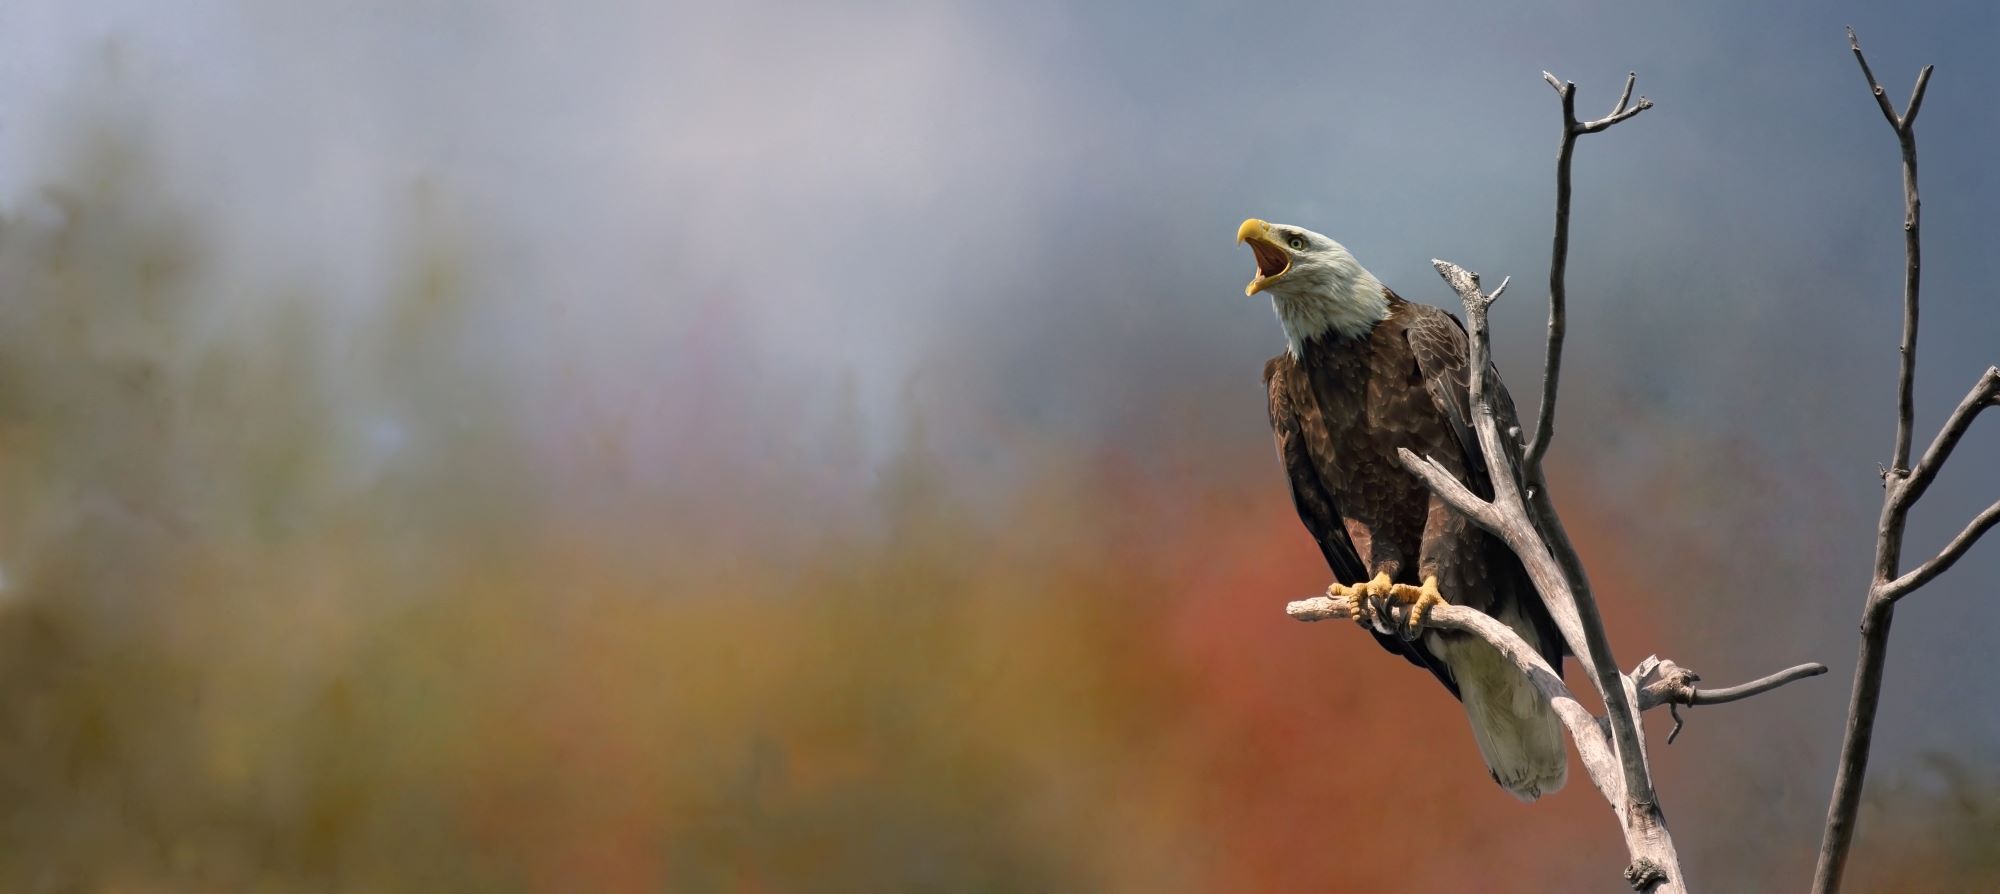 A bald eagle perched in a dead tree.